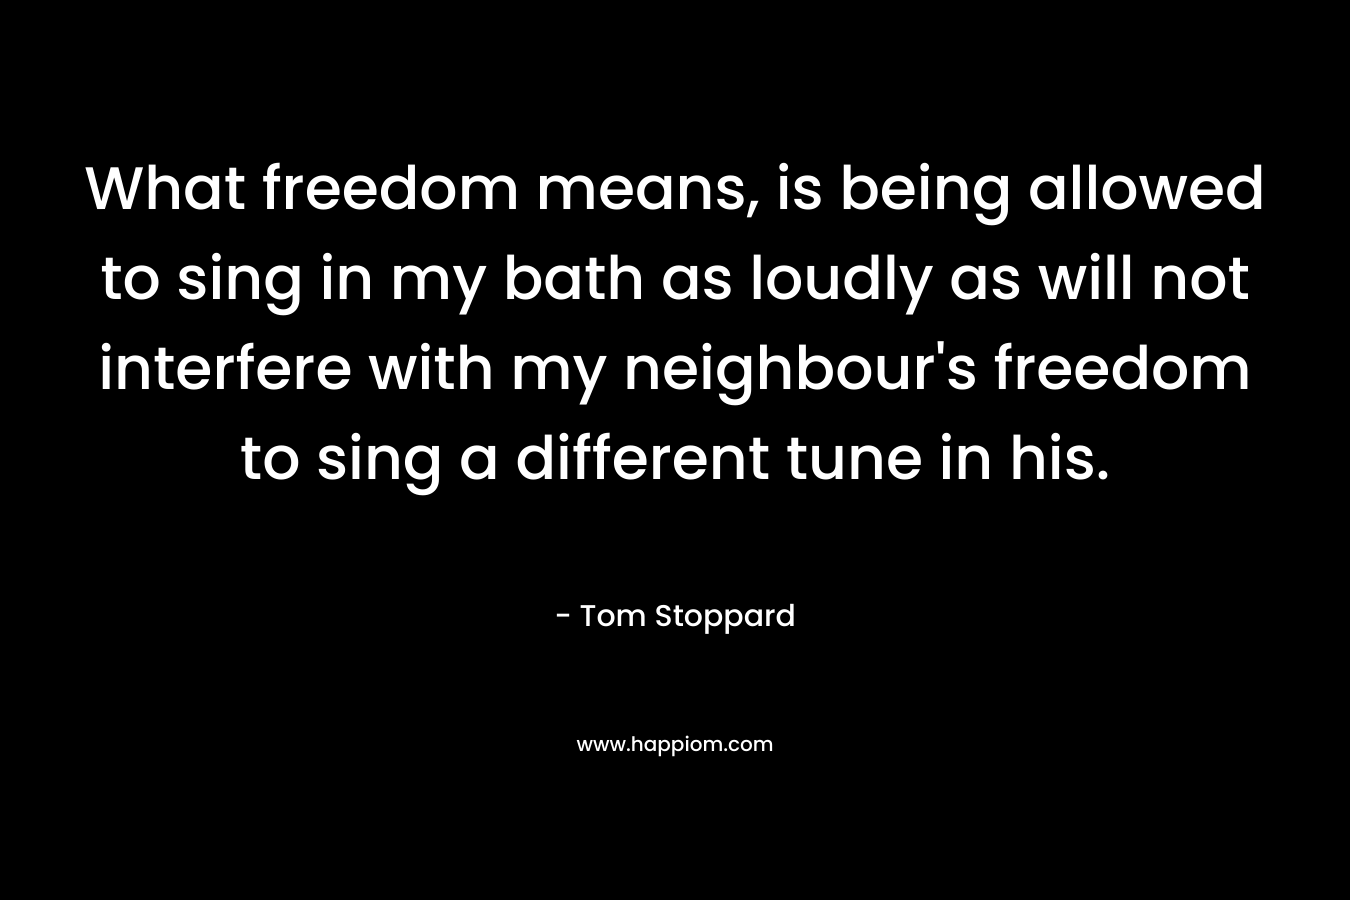 What freedom means, is being allowed to sing in my bath as loudly as will not interfere with my neighbour's freedom to sing a different tune in his.